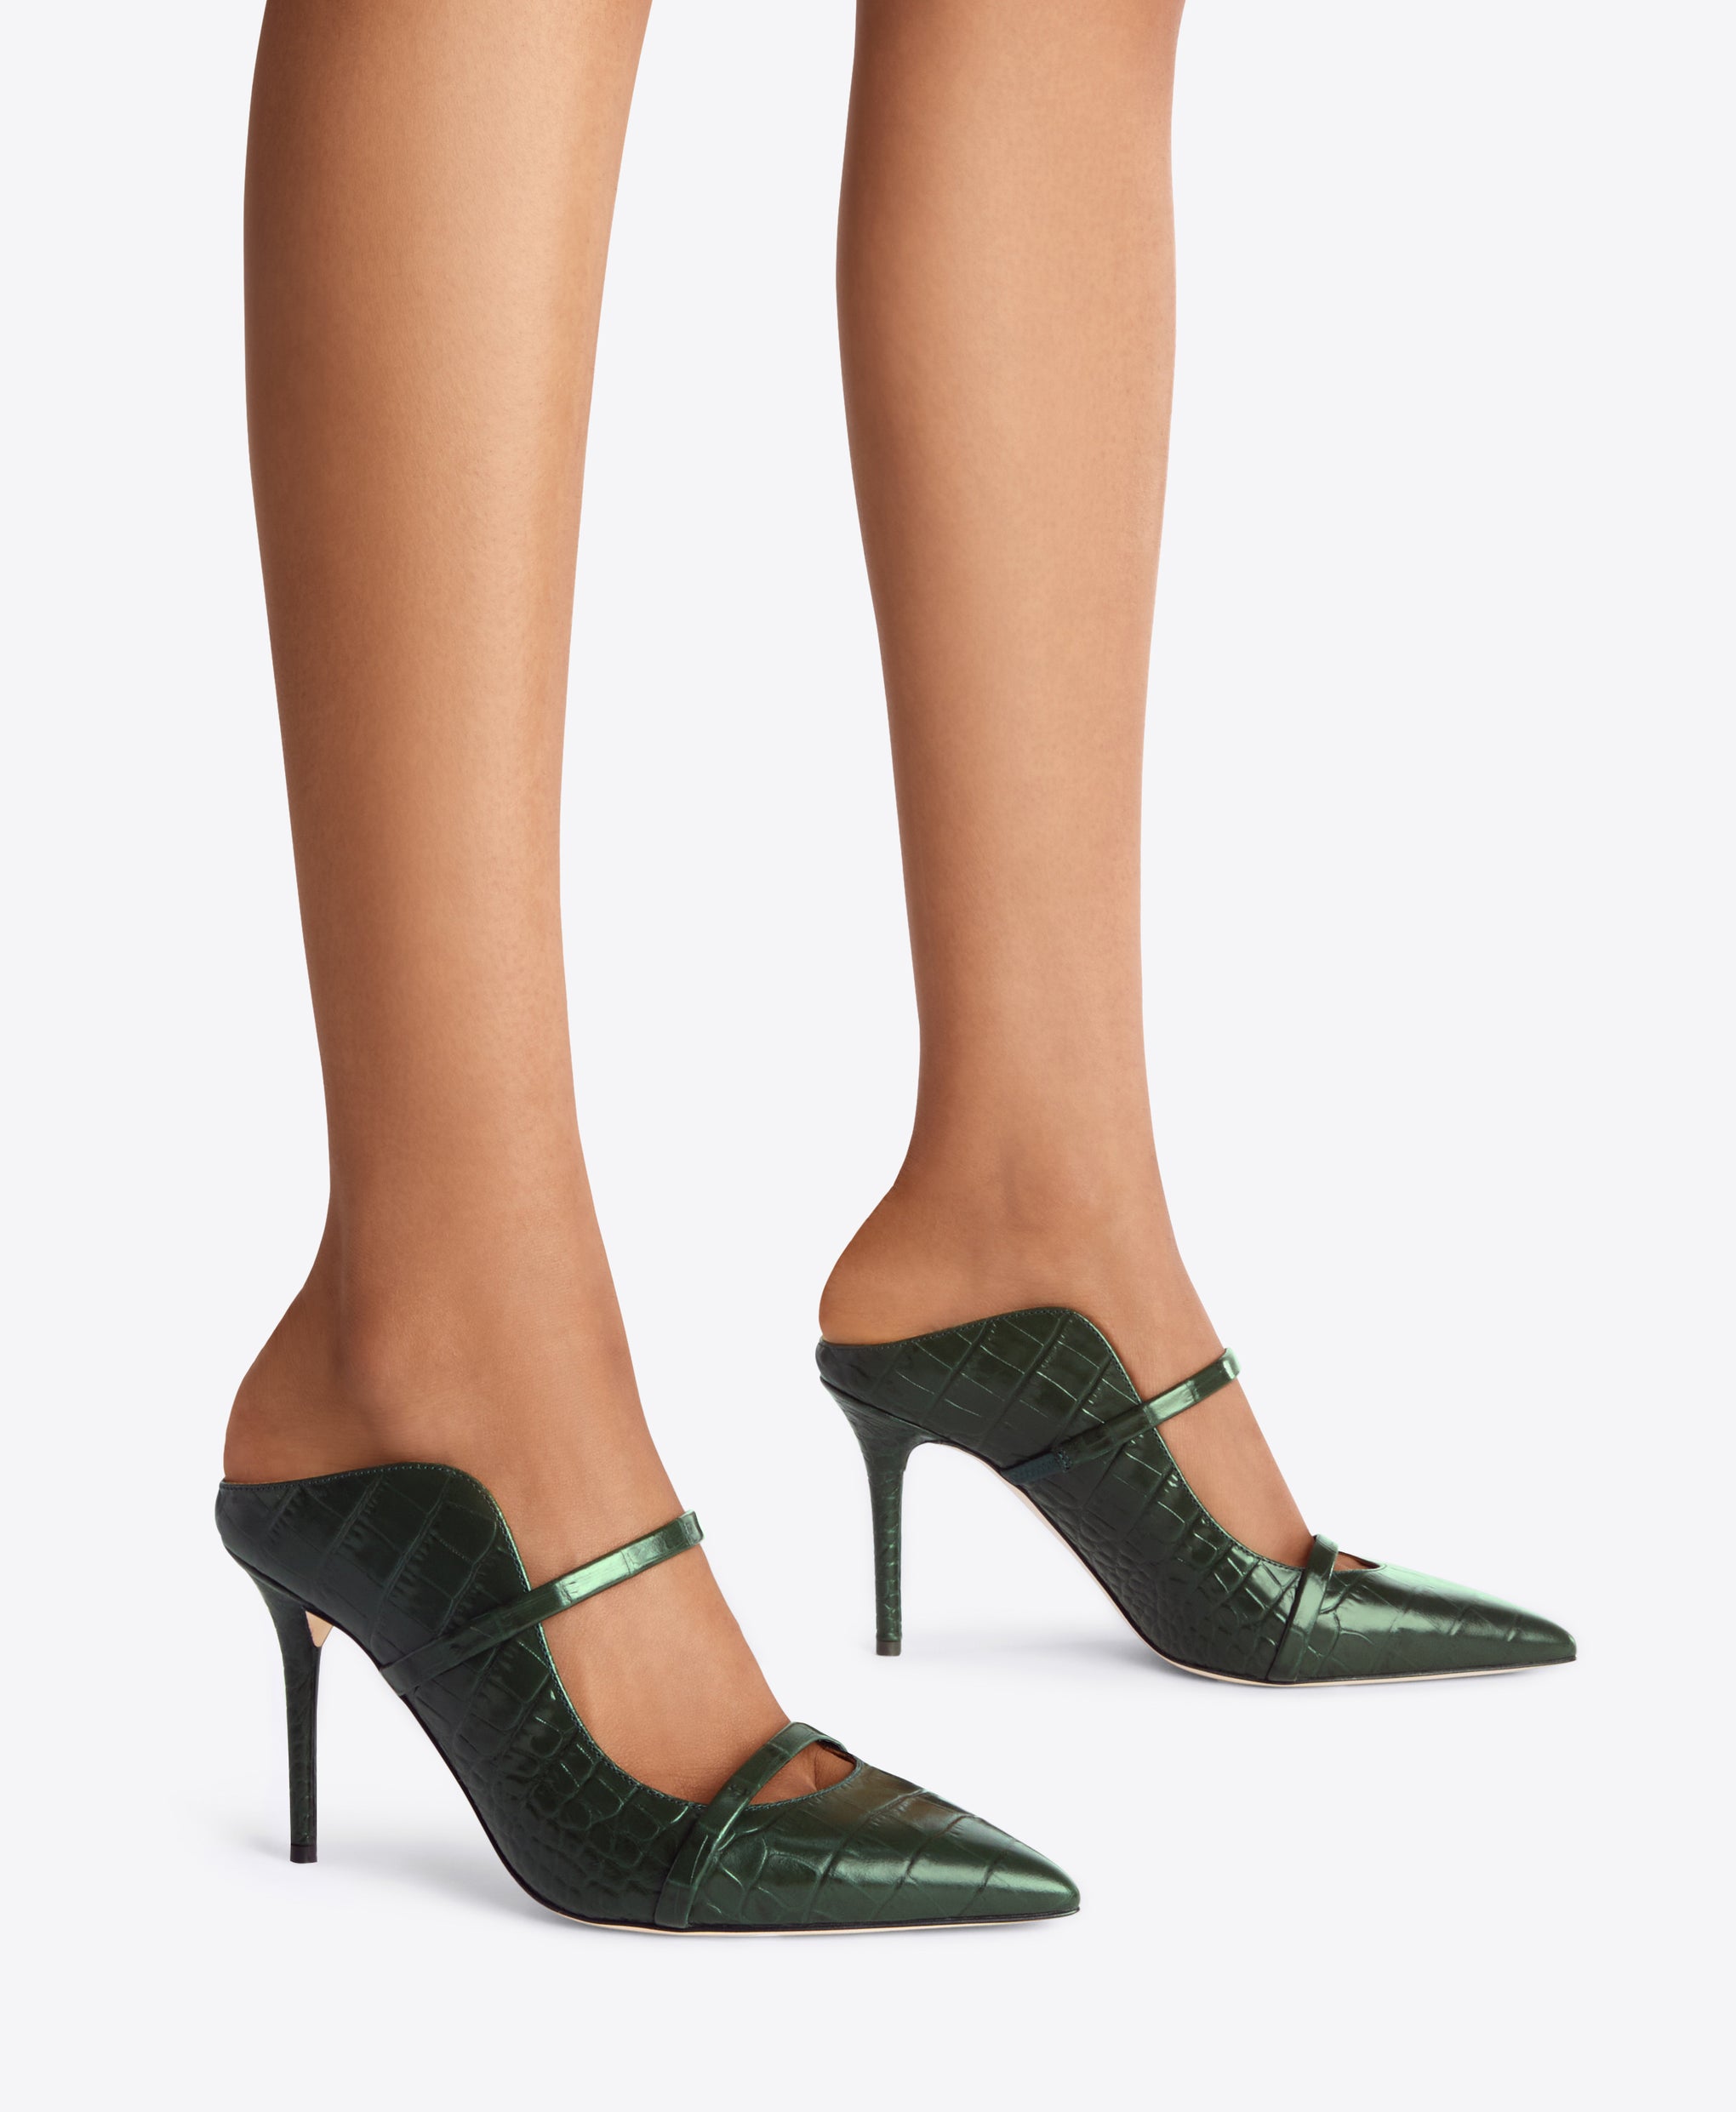 Double Strap Mules in Pine Green - Pointed Toe on Stiletto | Malone Souliers